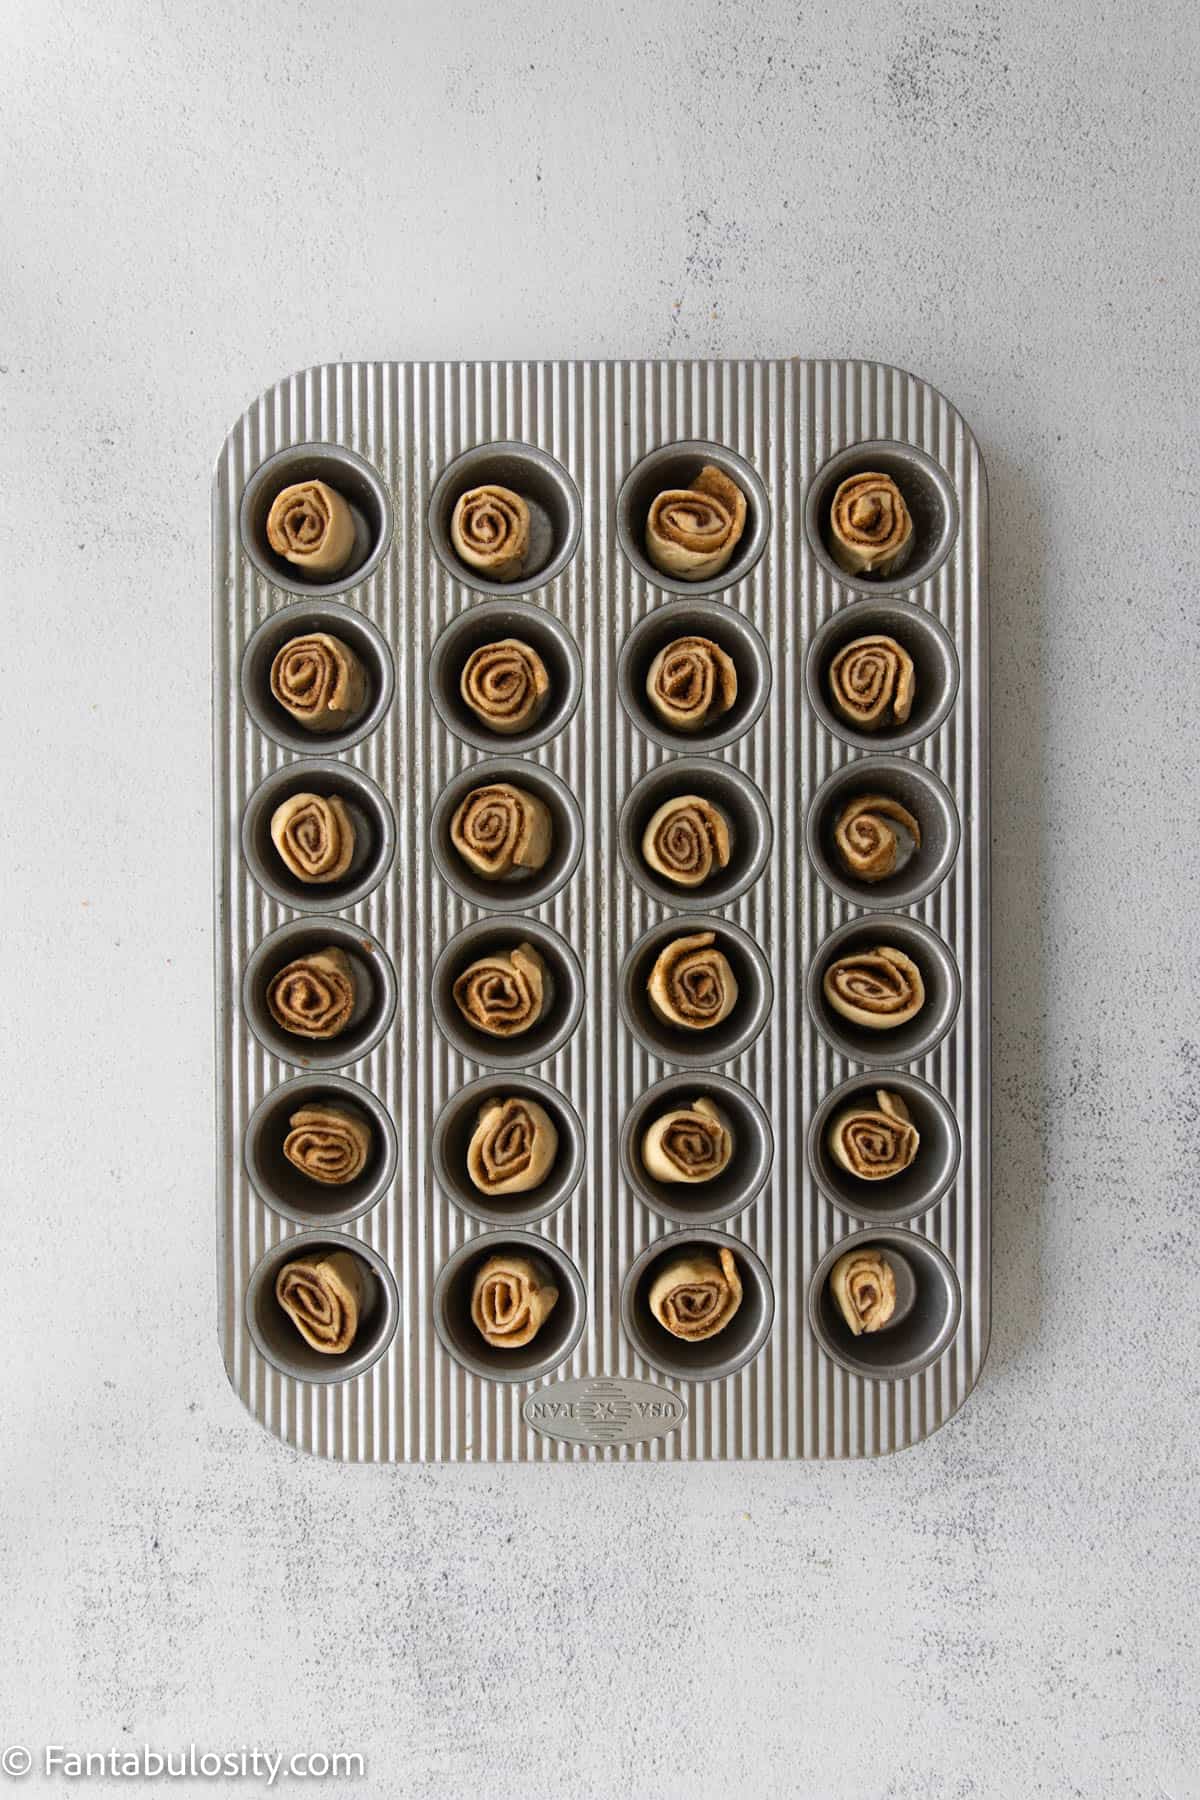 I mini cupcake pan with 24 spaces, each filled with an unbaked mini cinnamon roll.